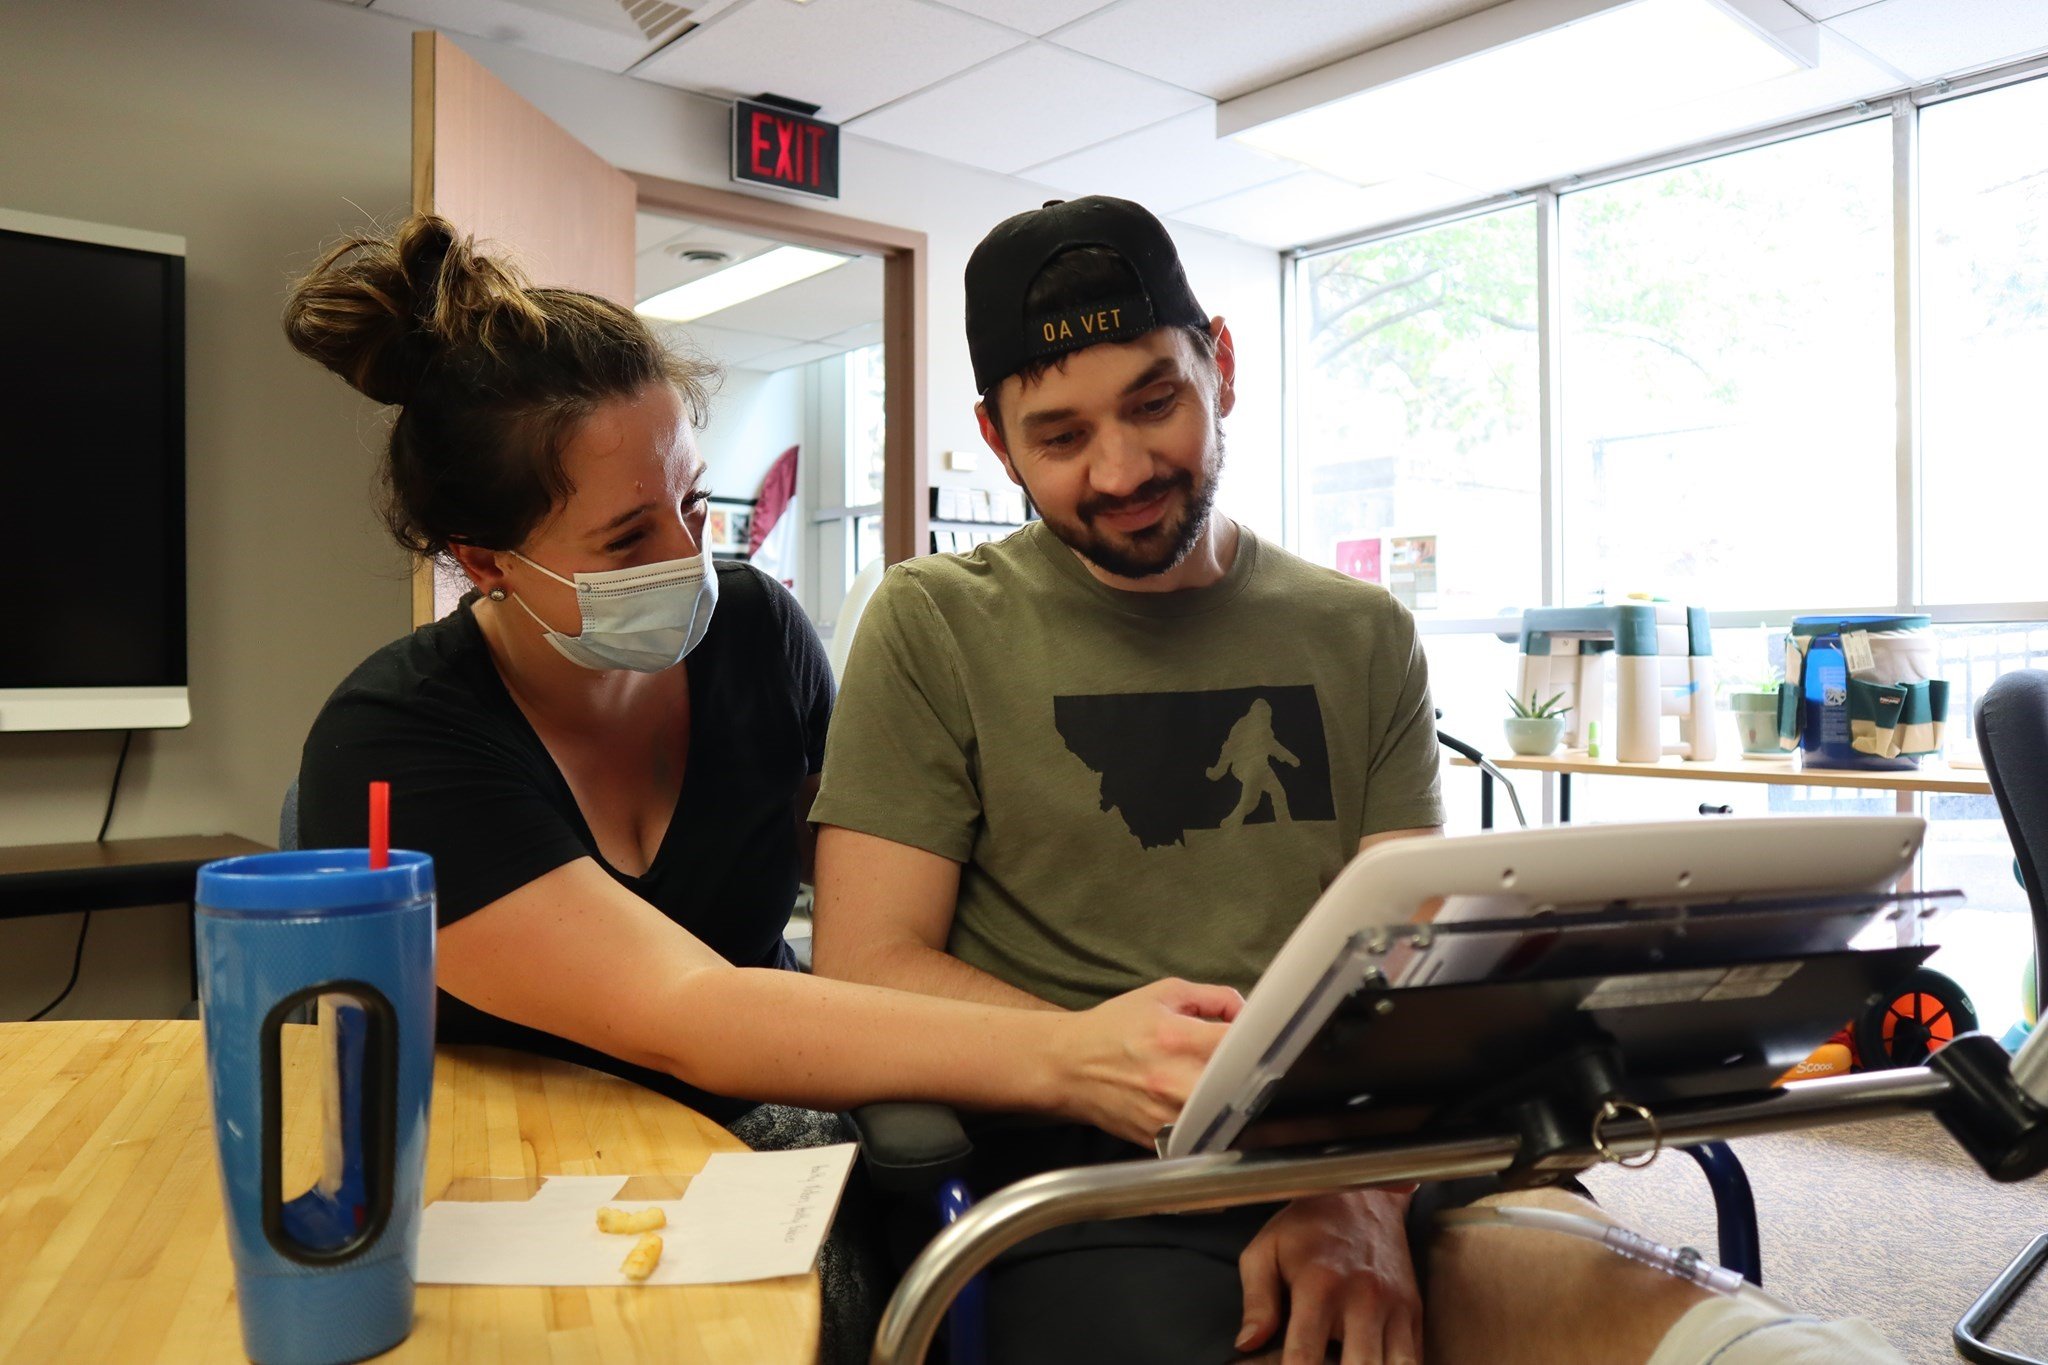 A smiling man in a wheelchair receives help with a mounted tablet computer from a woman smiling behind her mask.